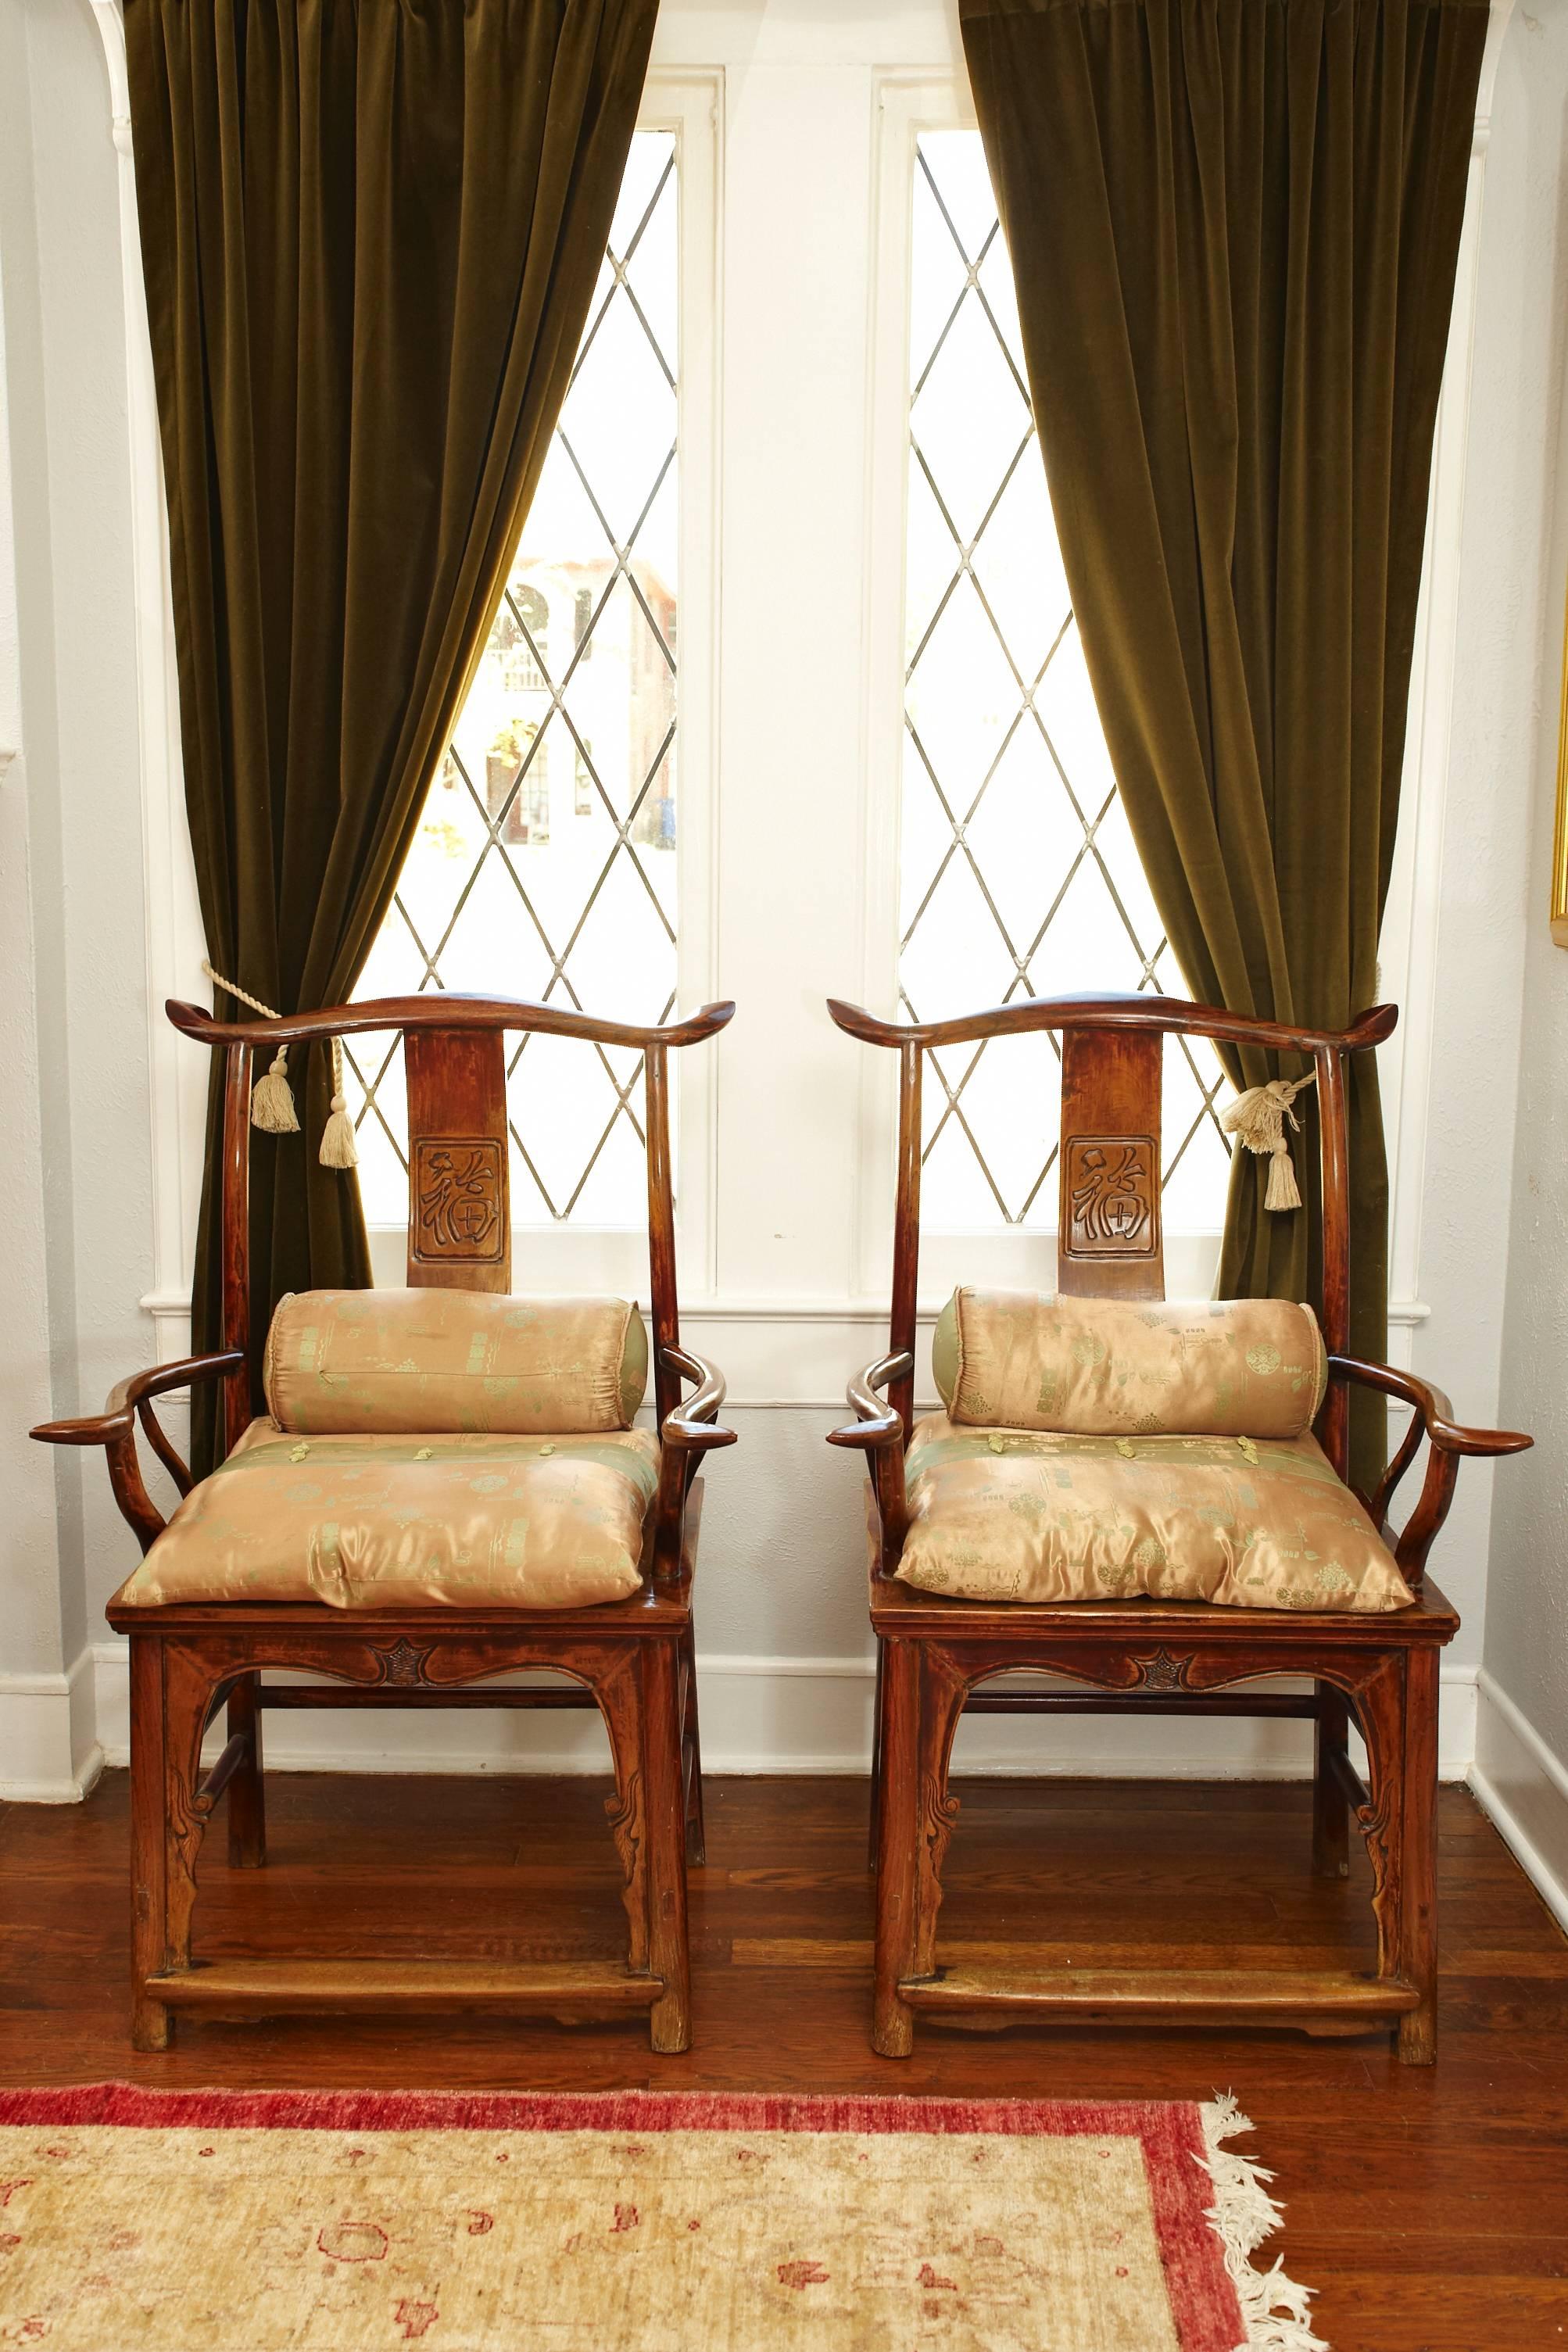 Late 18th-19th century elmwood armchairs, Ming style.

Each has a curved crest rail supported on curved rear posts and an S-shaped back splat. The arm rails are supported on slender standing stiles and extend beyond the front posts. The rectangular